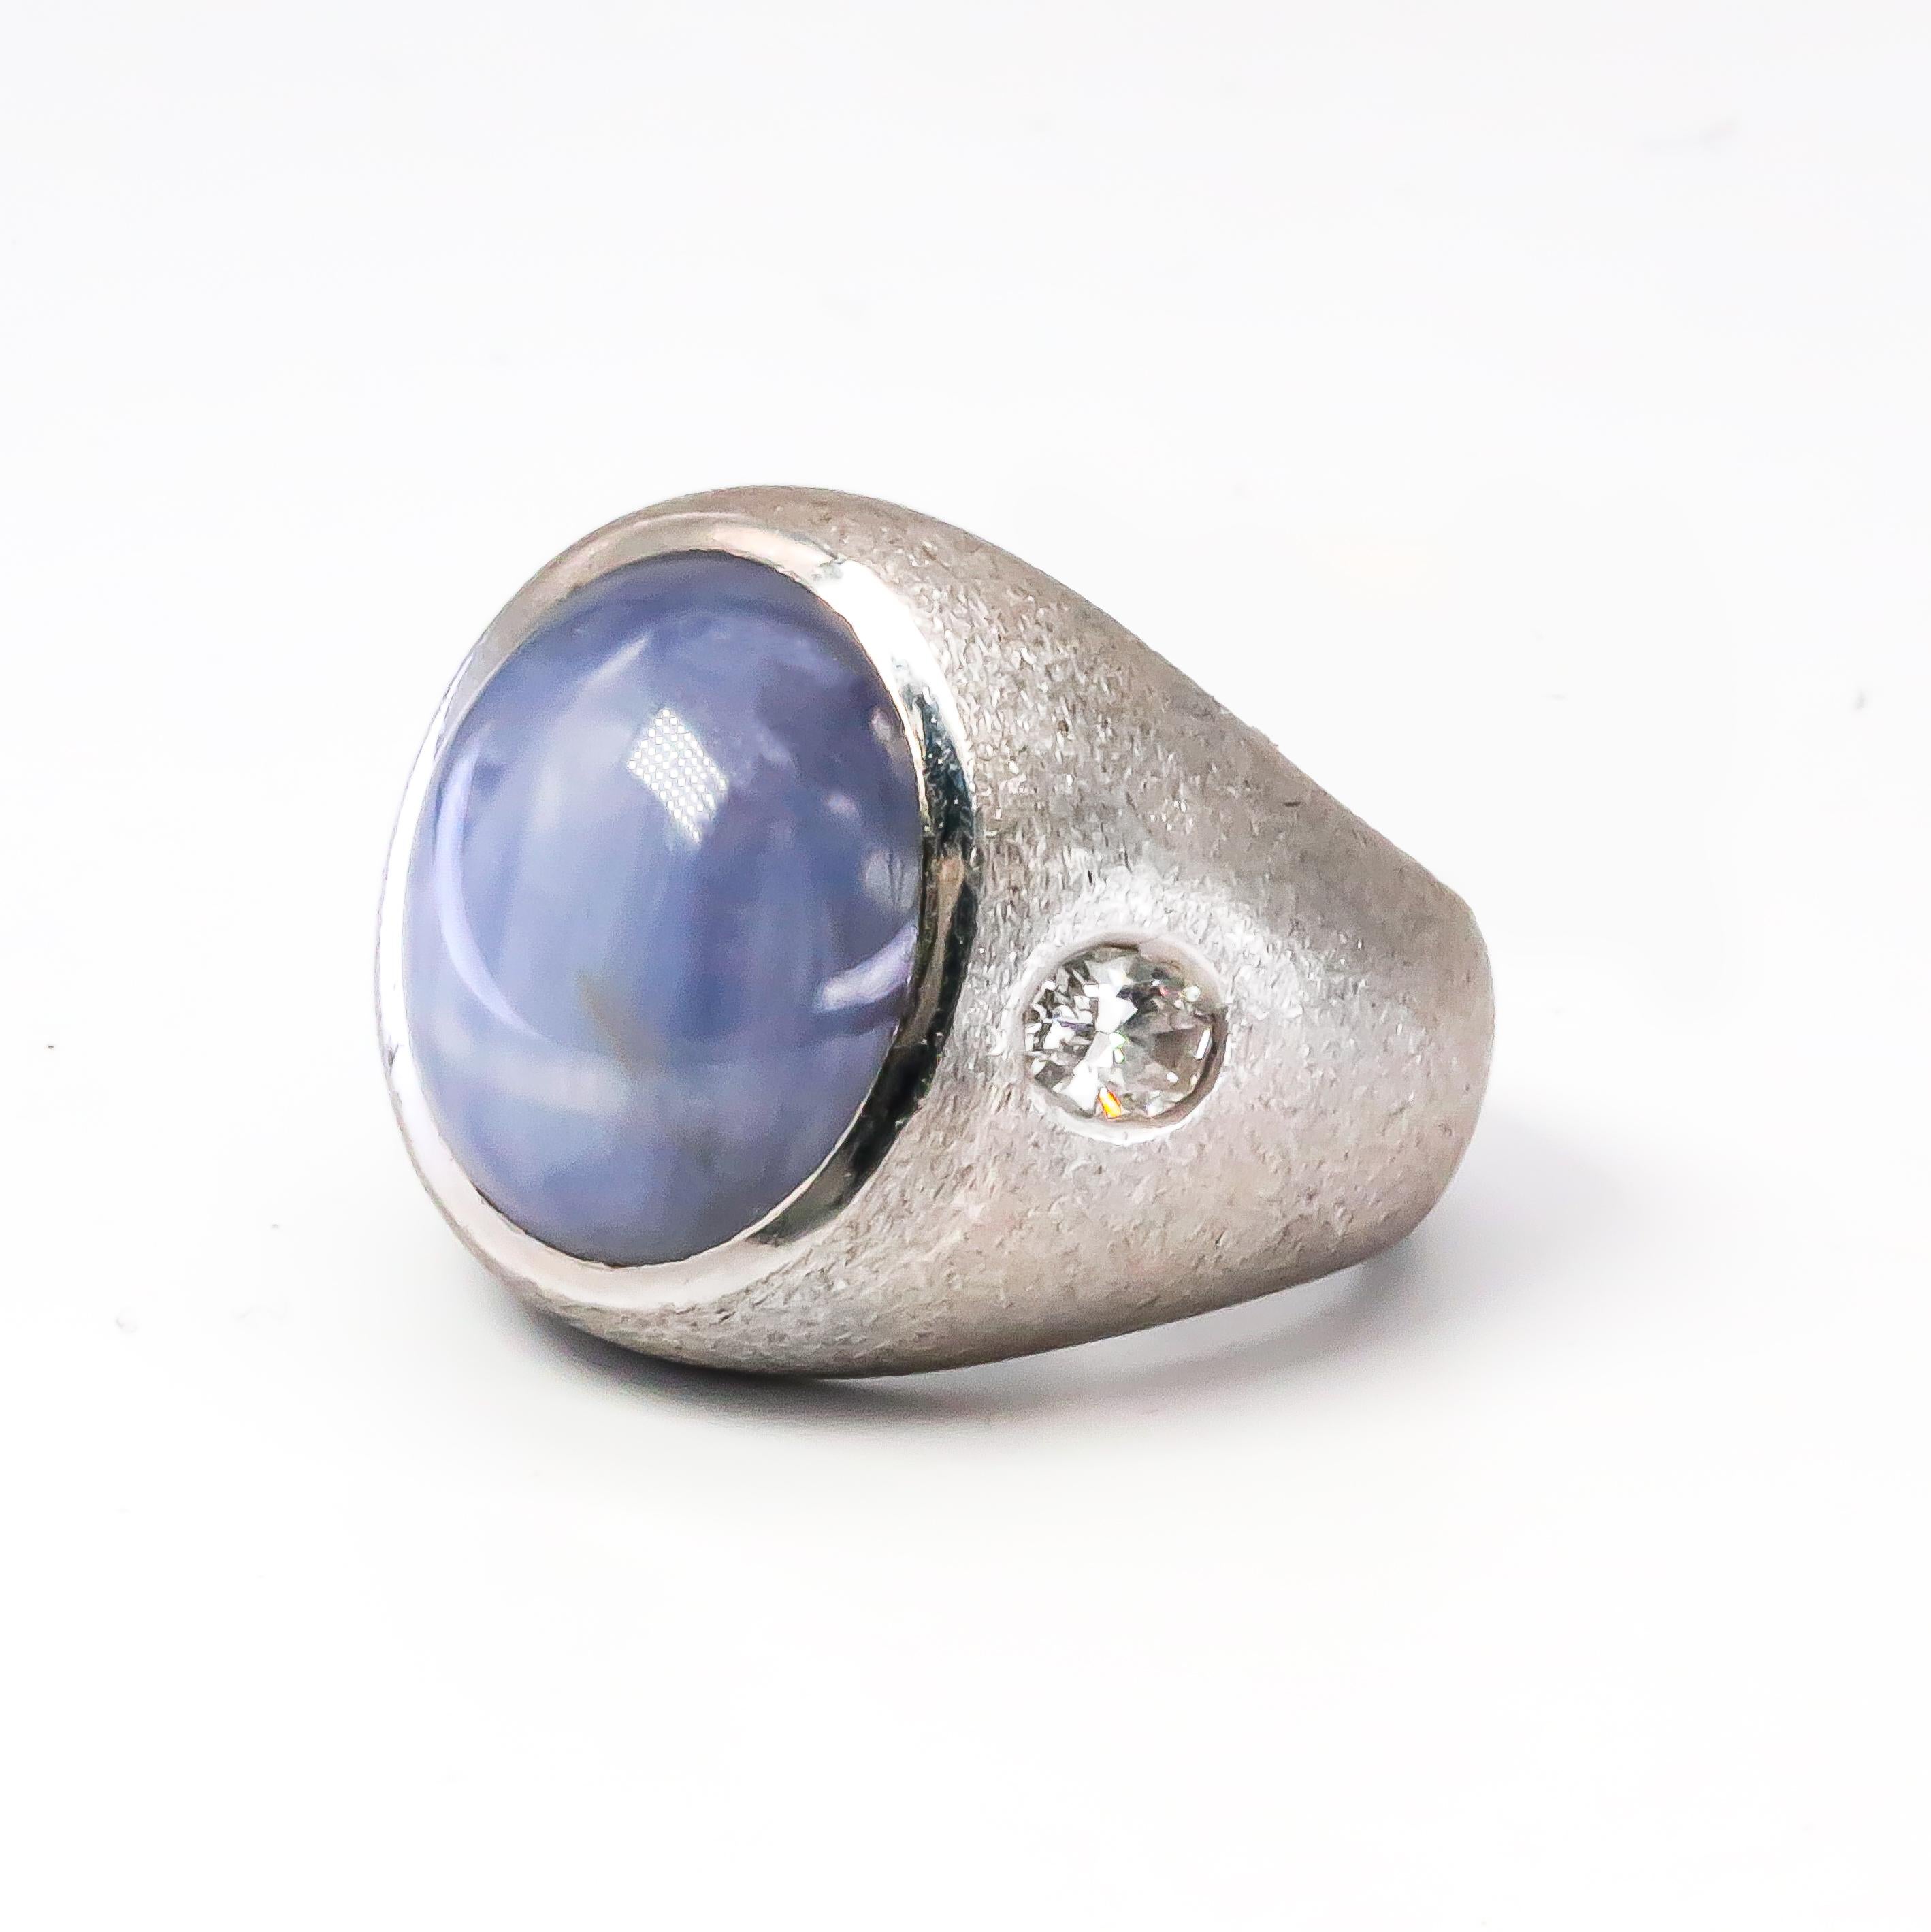 Apart of our unique collection of rare gemstones. This ring proudly presents a double star sapphire, with two diamonds flanking its sides. The formation of the star sapphire's shimmering rays is called asterism, it causes needle like inclusions to